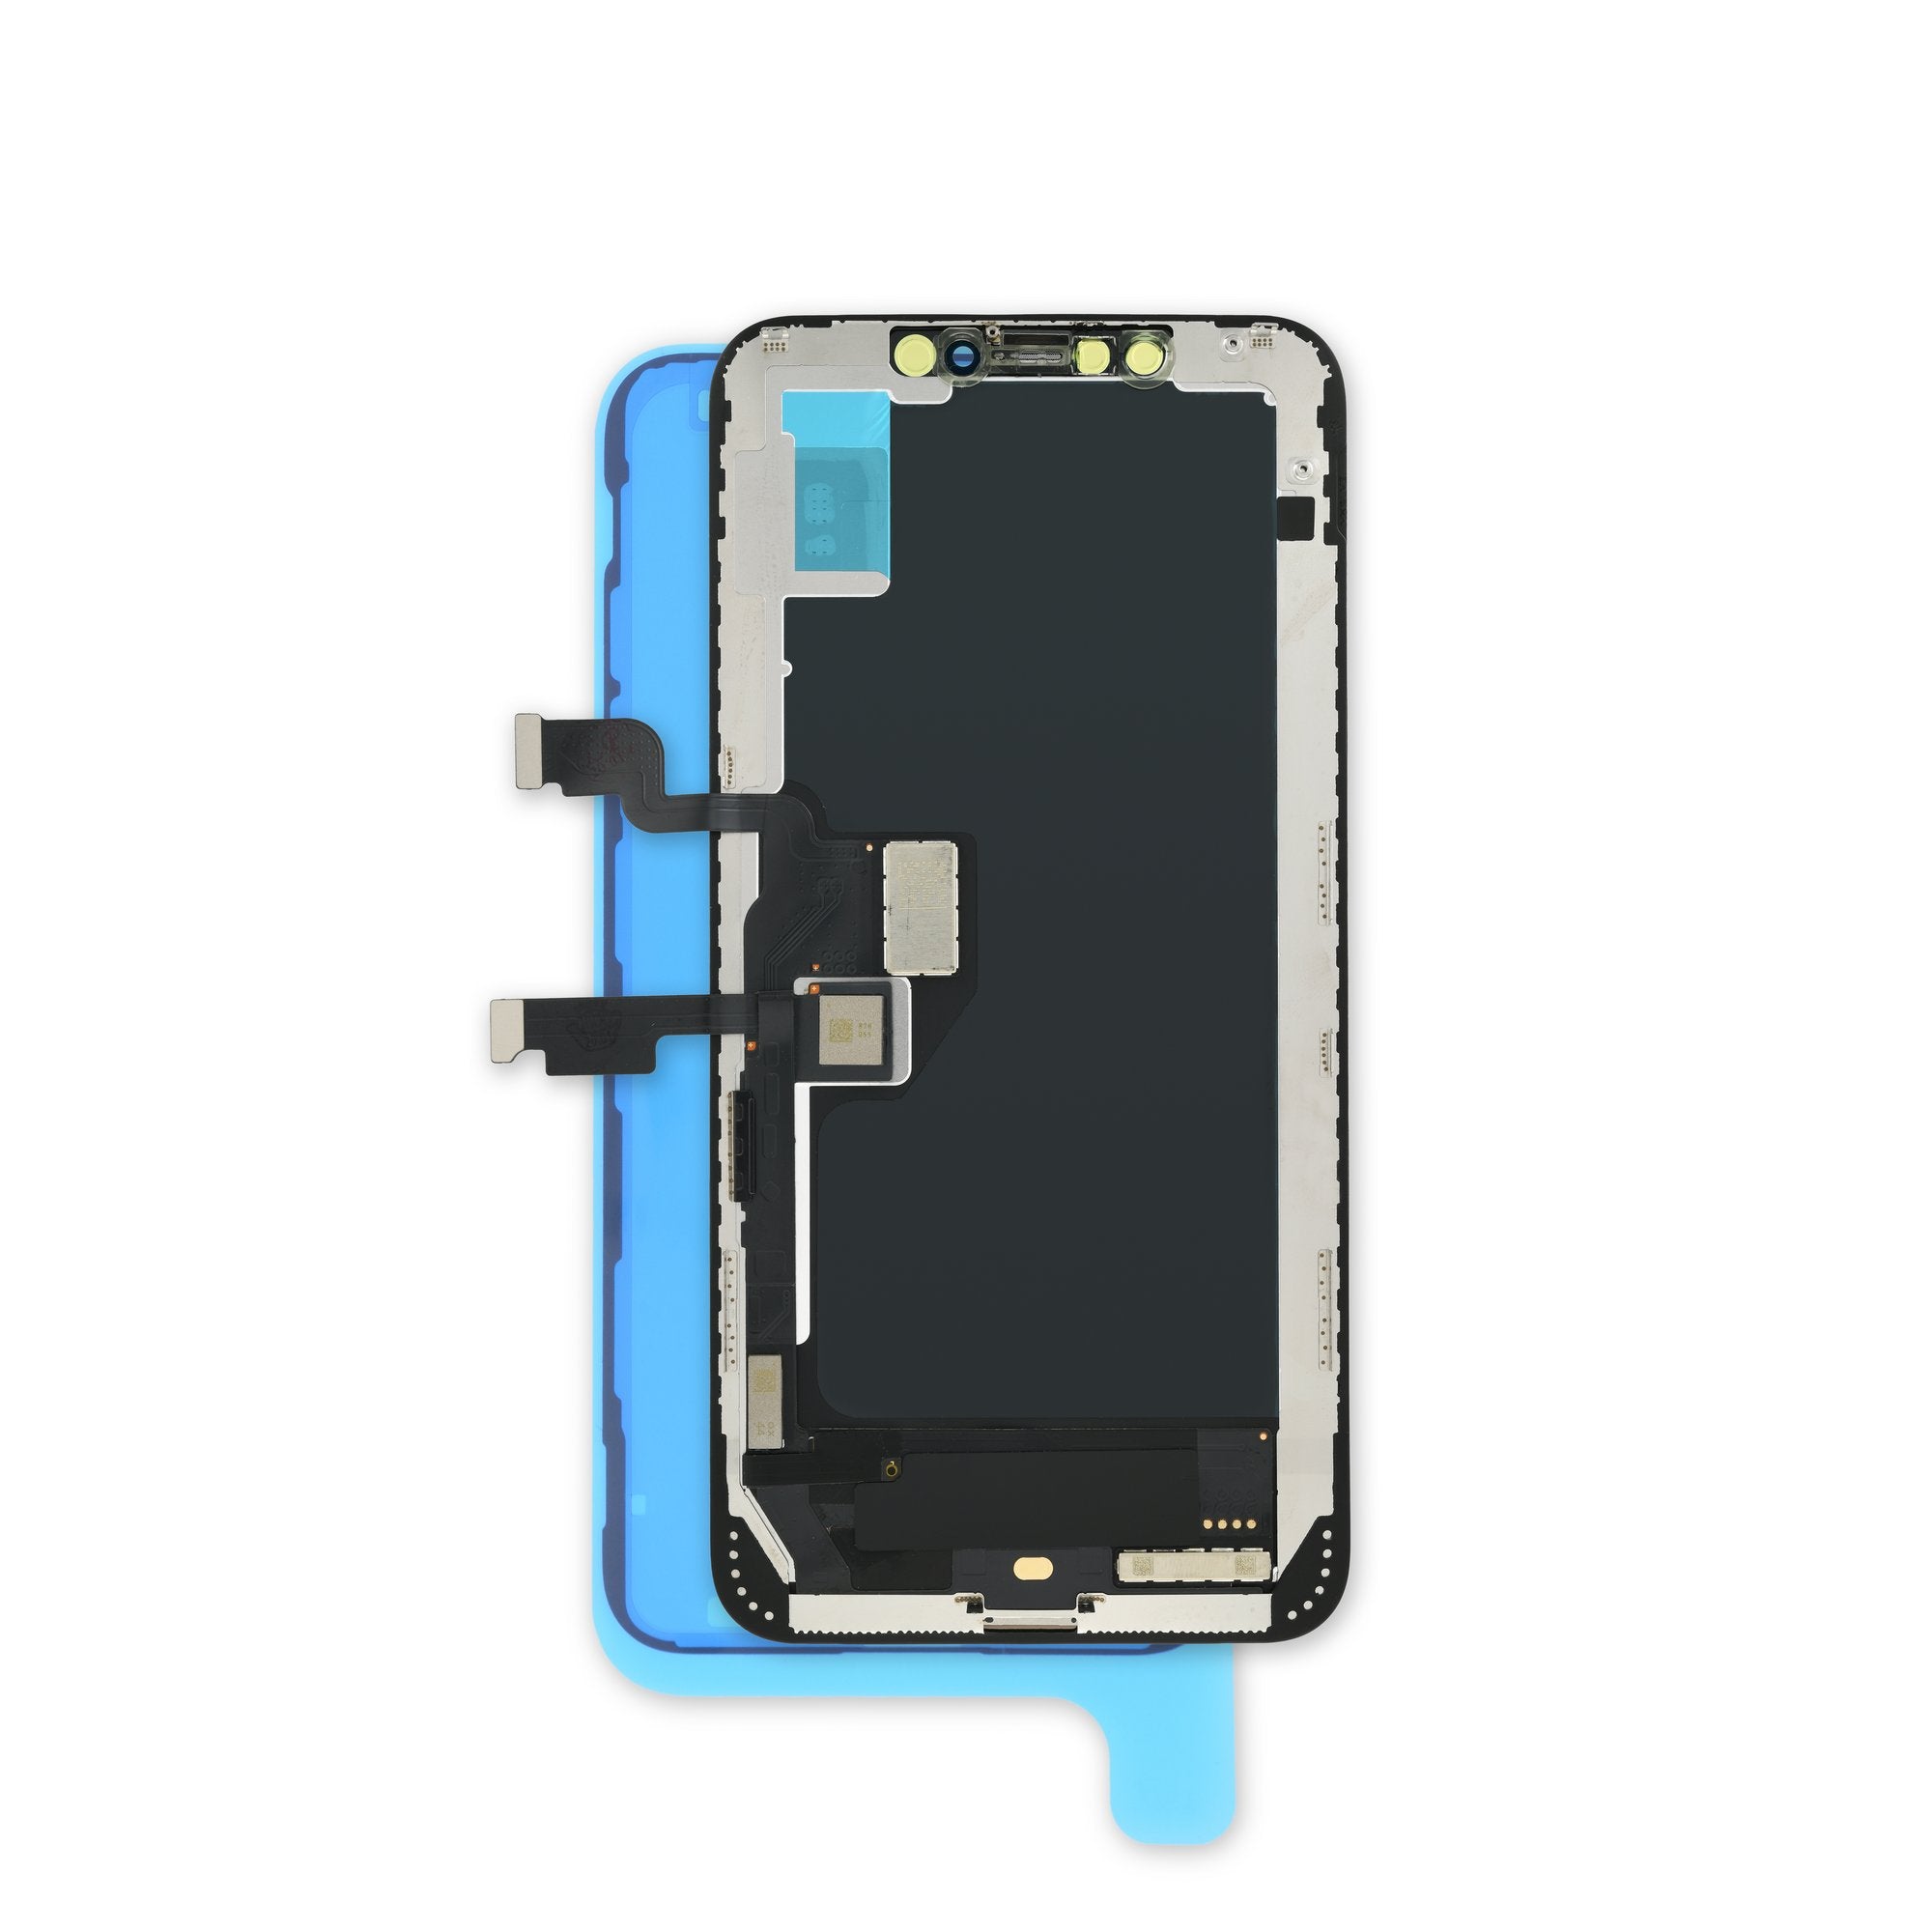 iPhone XS Max Screen: LCD / OLED and Digitizer Fix Kit - iFixit